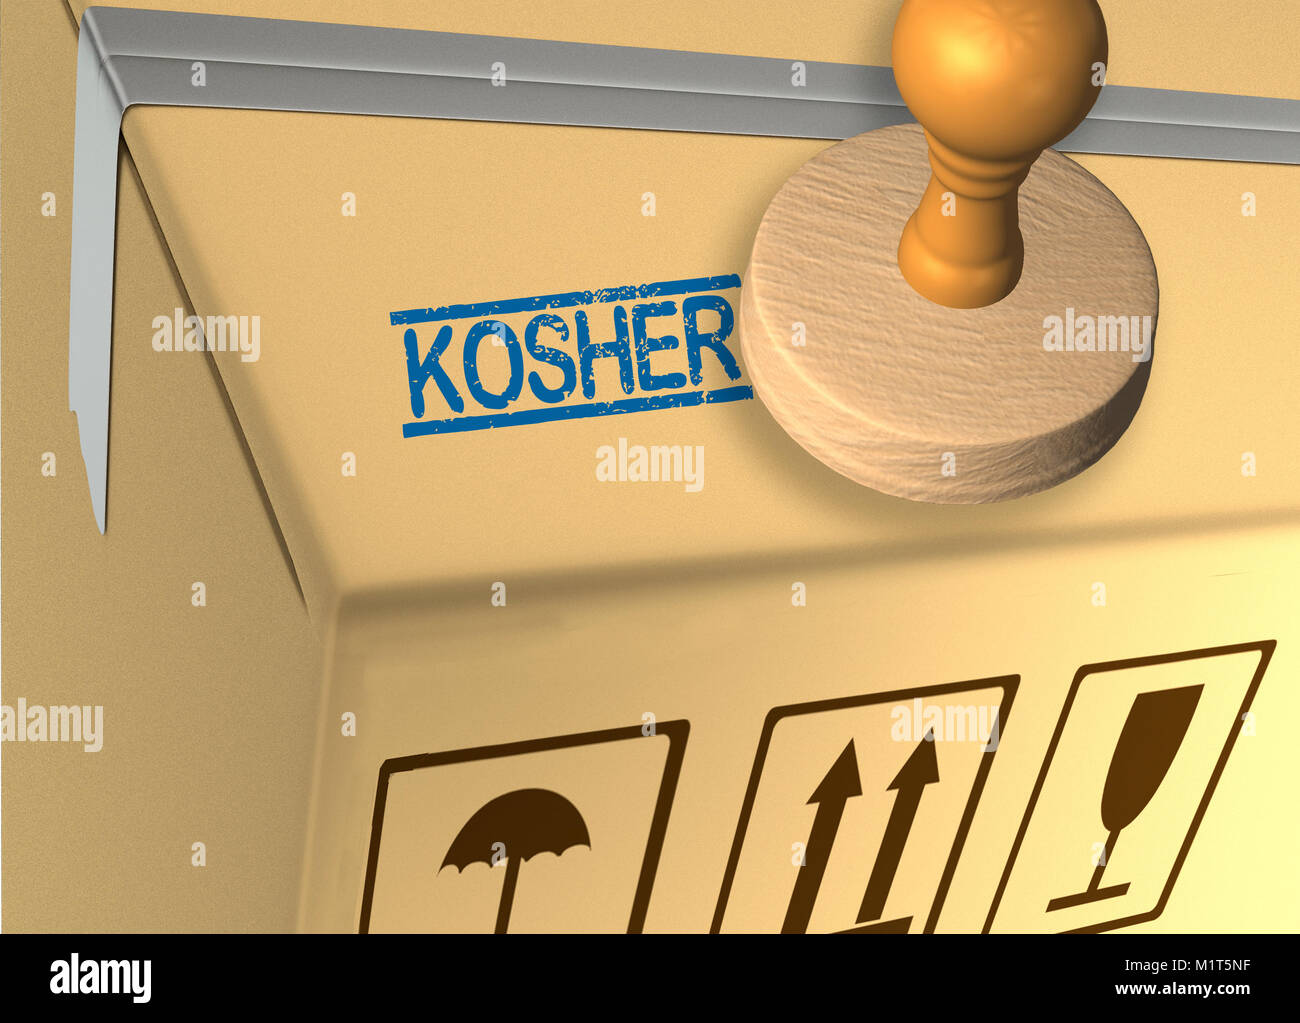 3D illustration of KOSHER stamp title on a carton which contains food Stock Photo